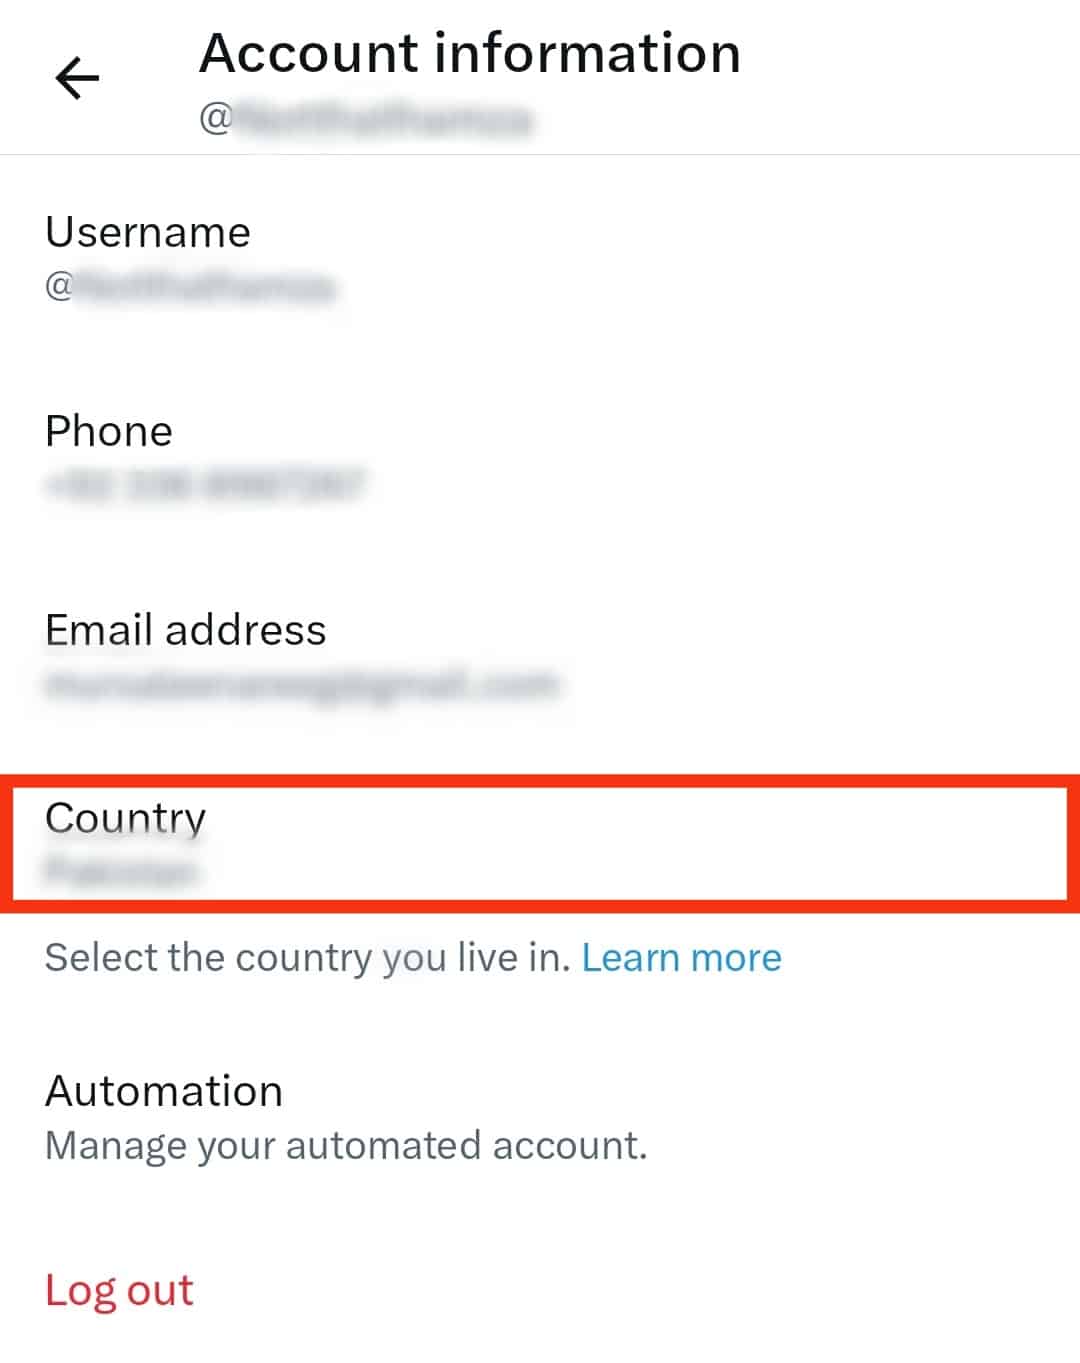 Tap On The Country Option